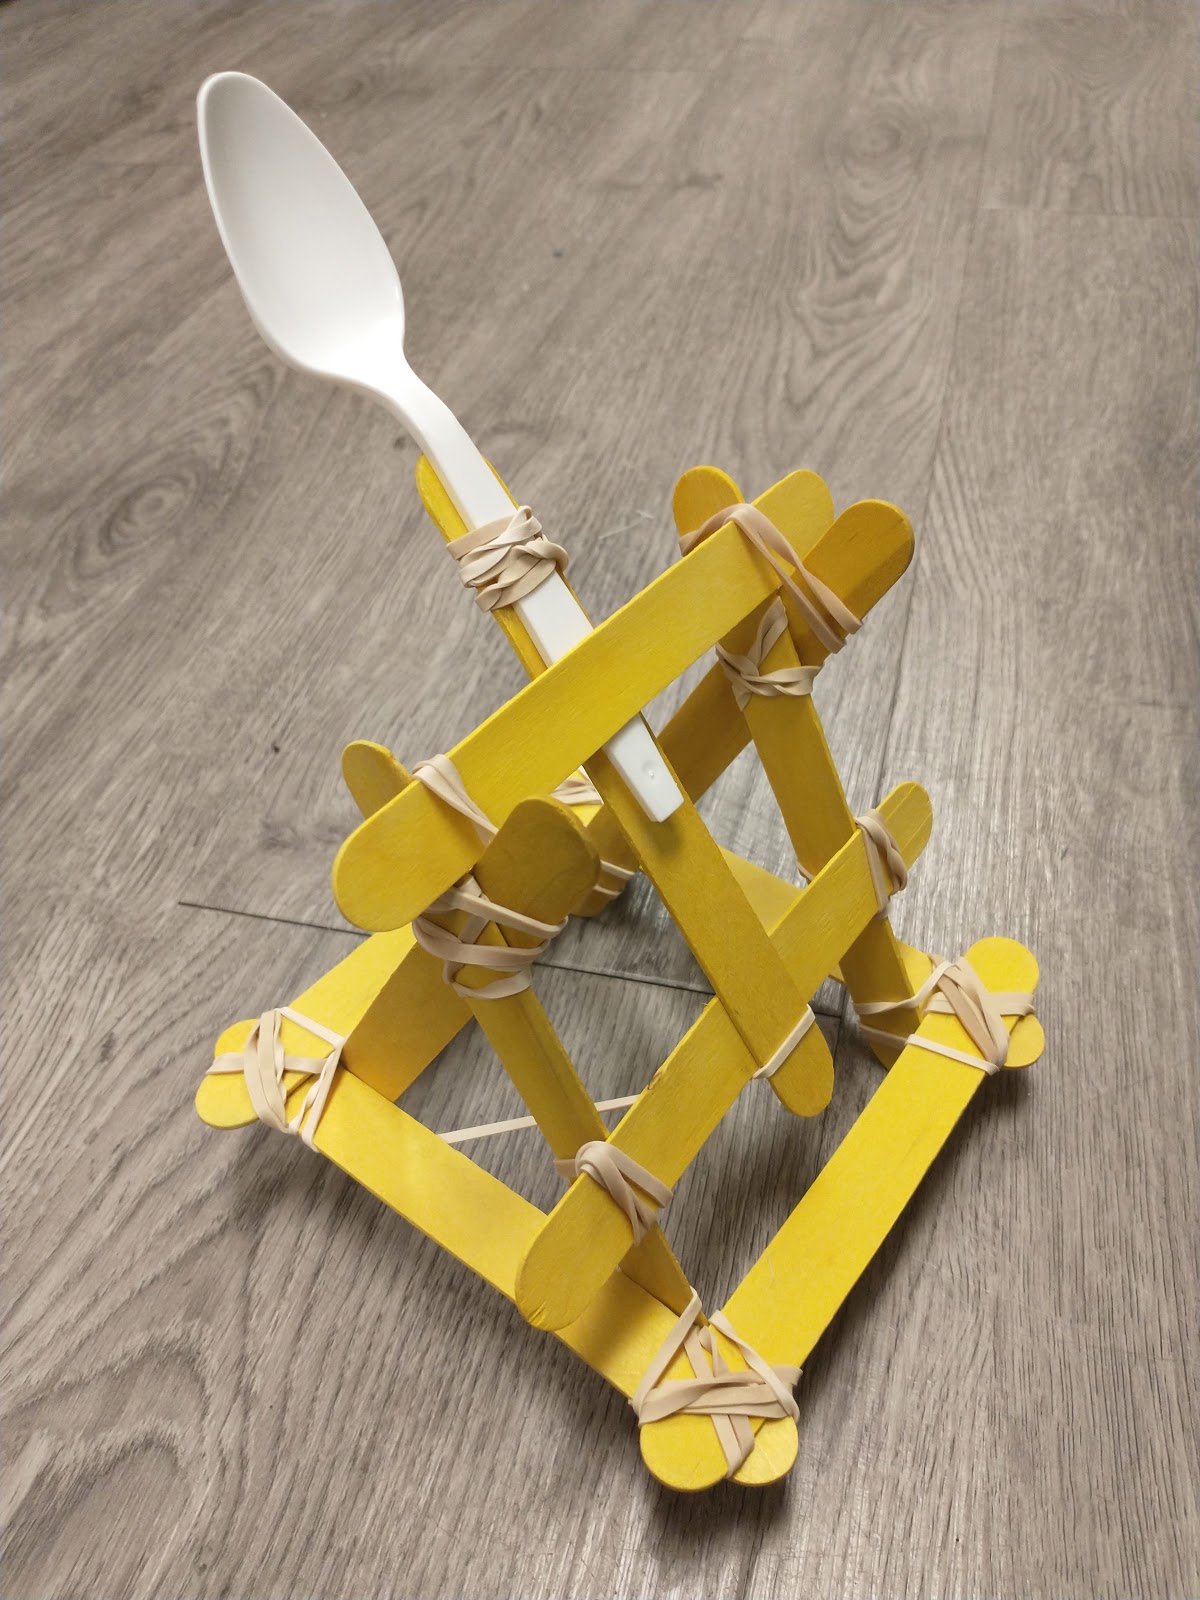 rubber band catapult